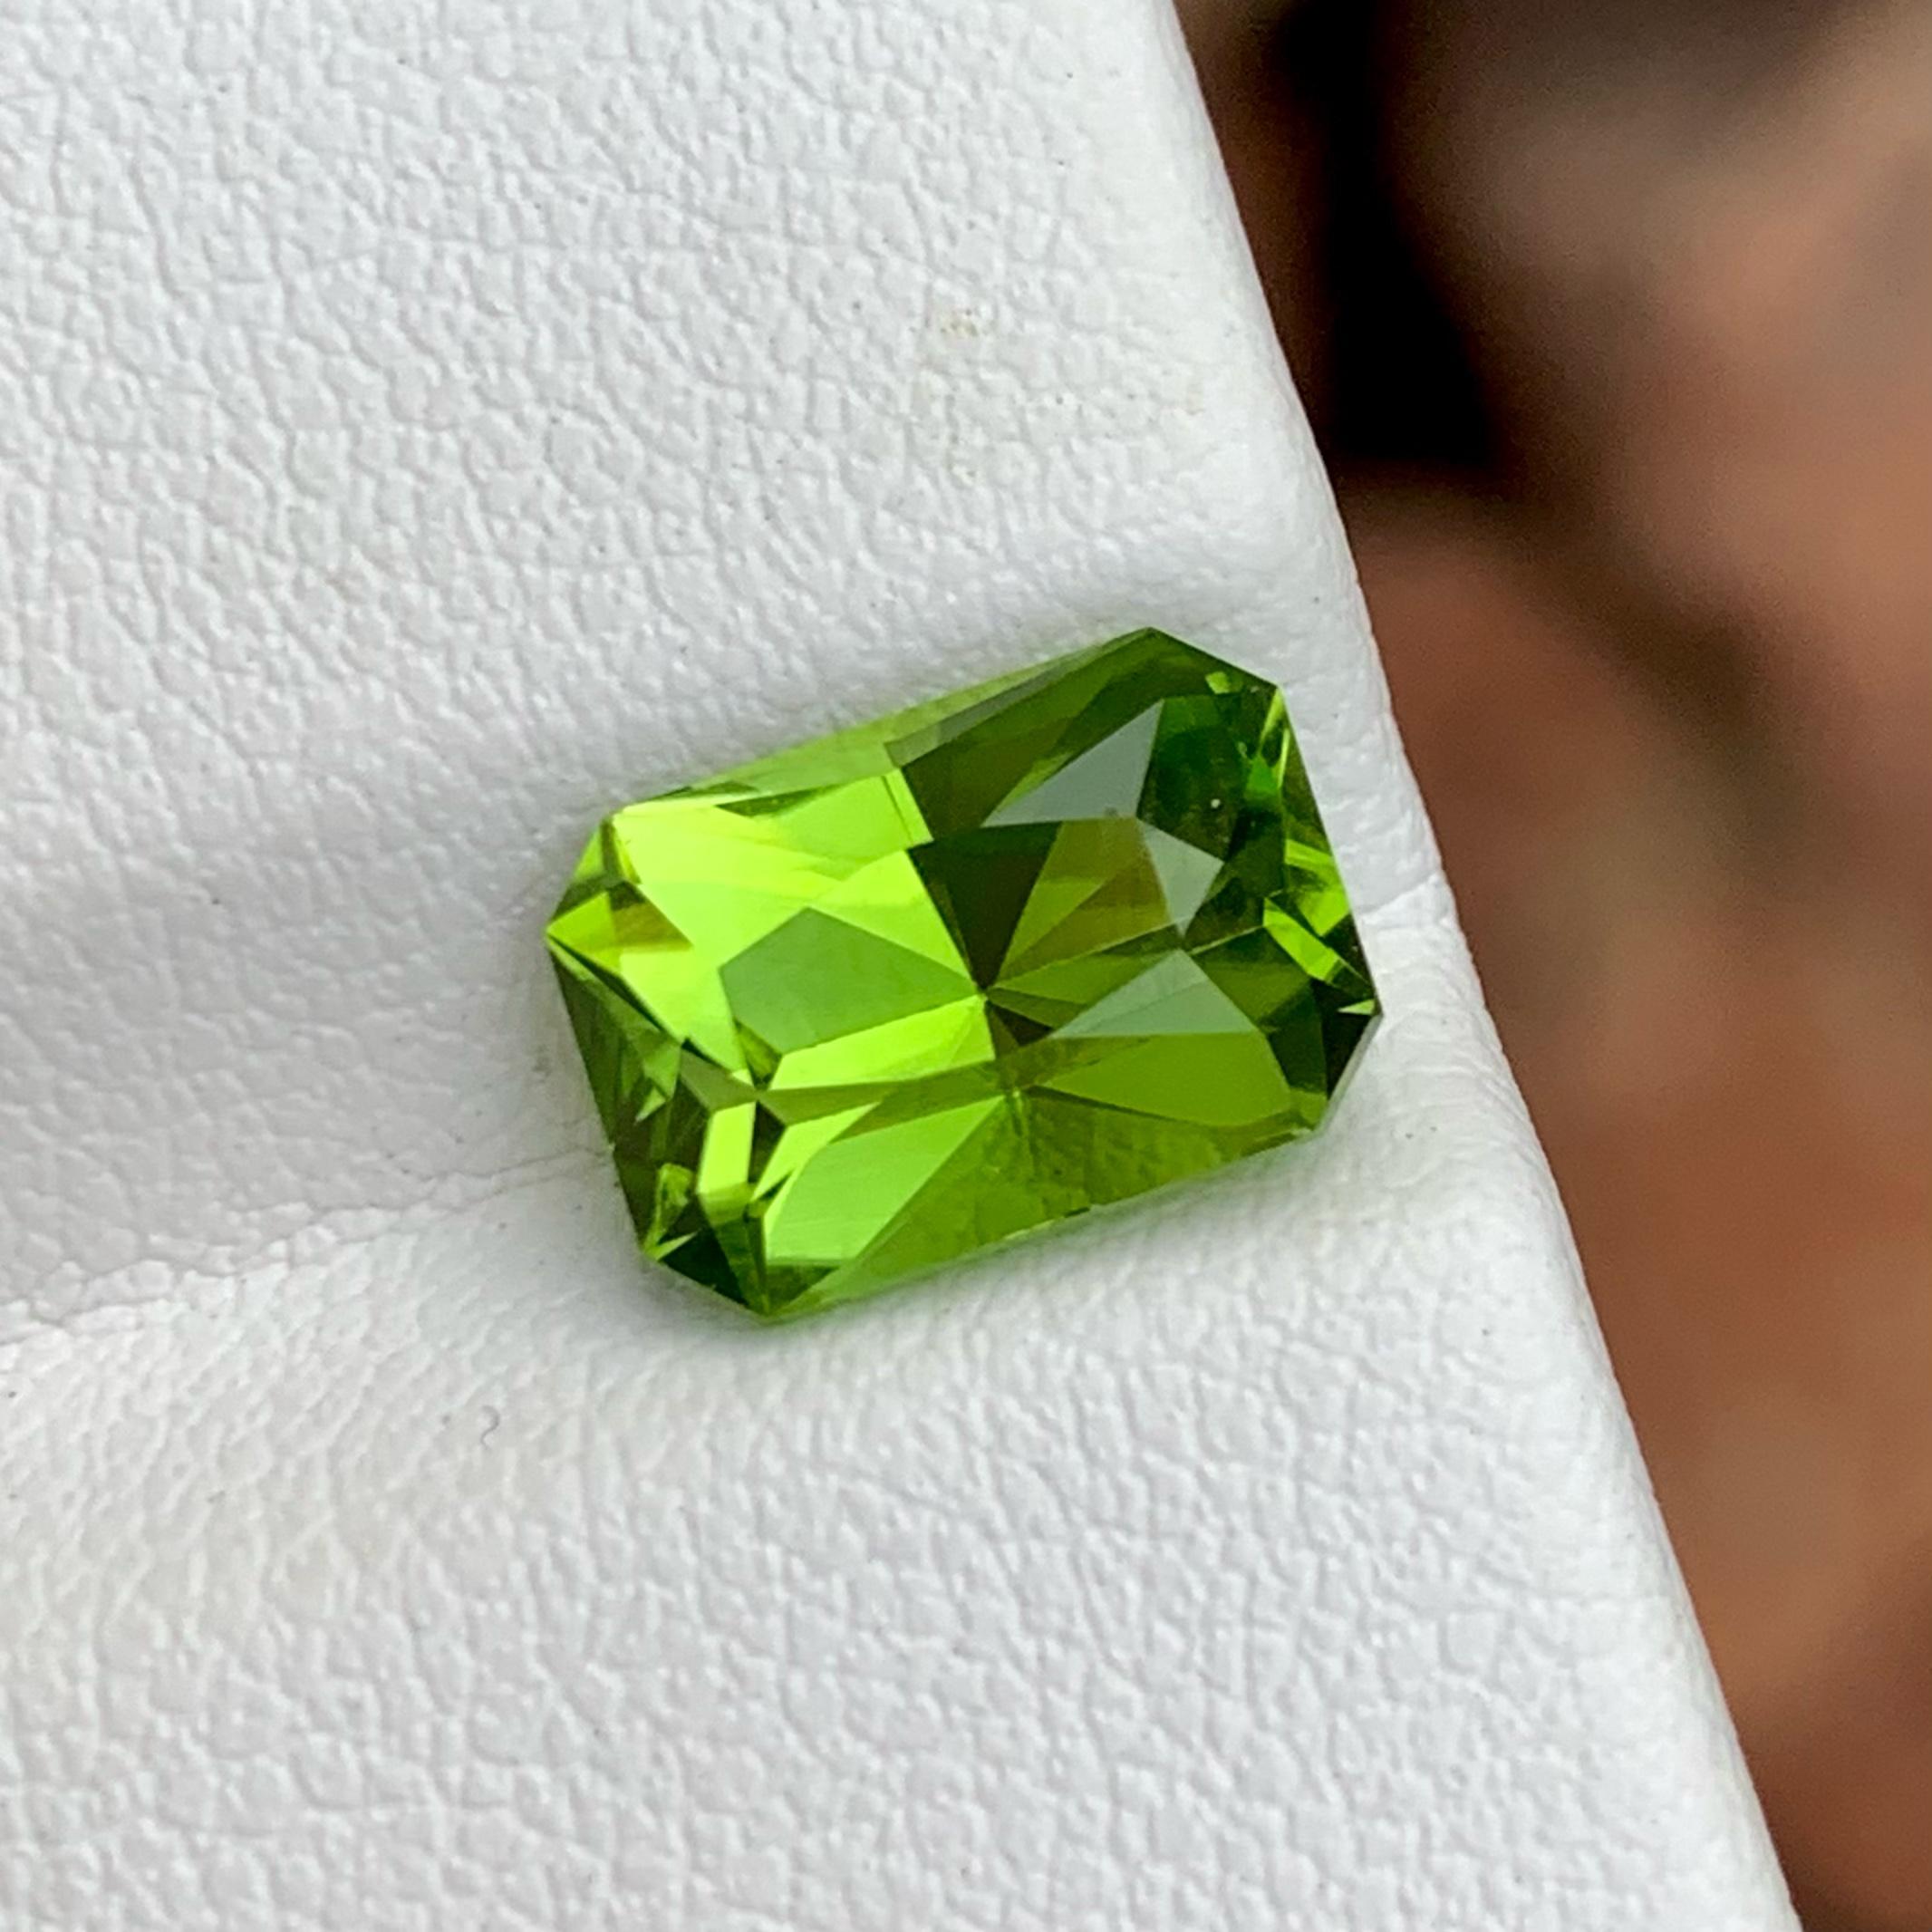 Apple Green Loose Gem Peridot, Available for Sale at wholesale price natural high quality 3.30 carats eye clean clarity loose Peridot from Pakistan.
Product Information
GEMSTONE TYPE:	Apple Green Loose Gem: Peridot
WEIGHT:	3.30 Carats
DIMENSIONS:	10